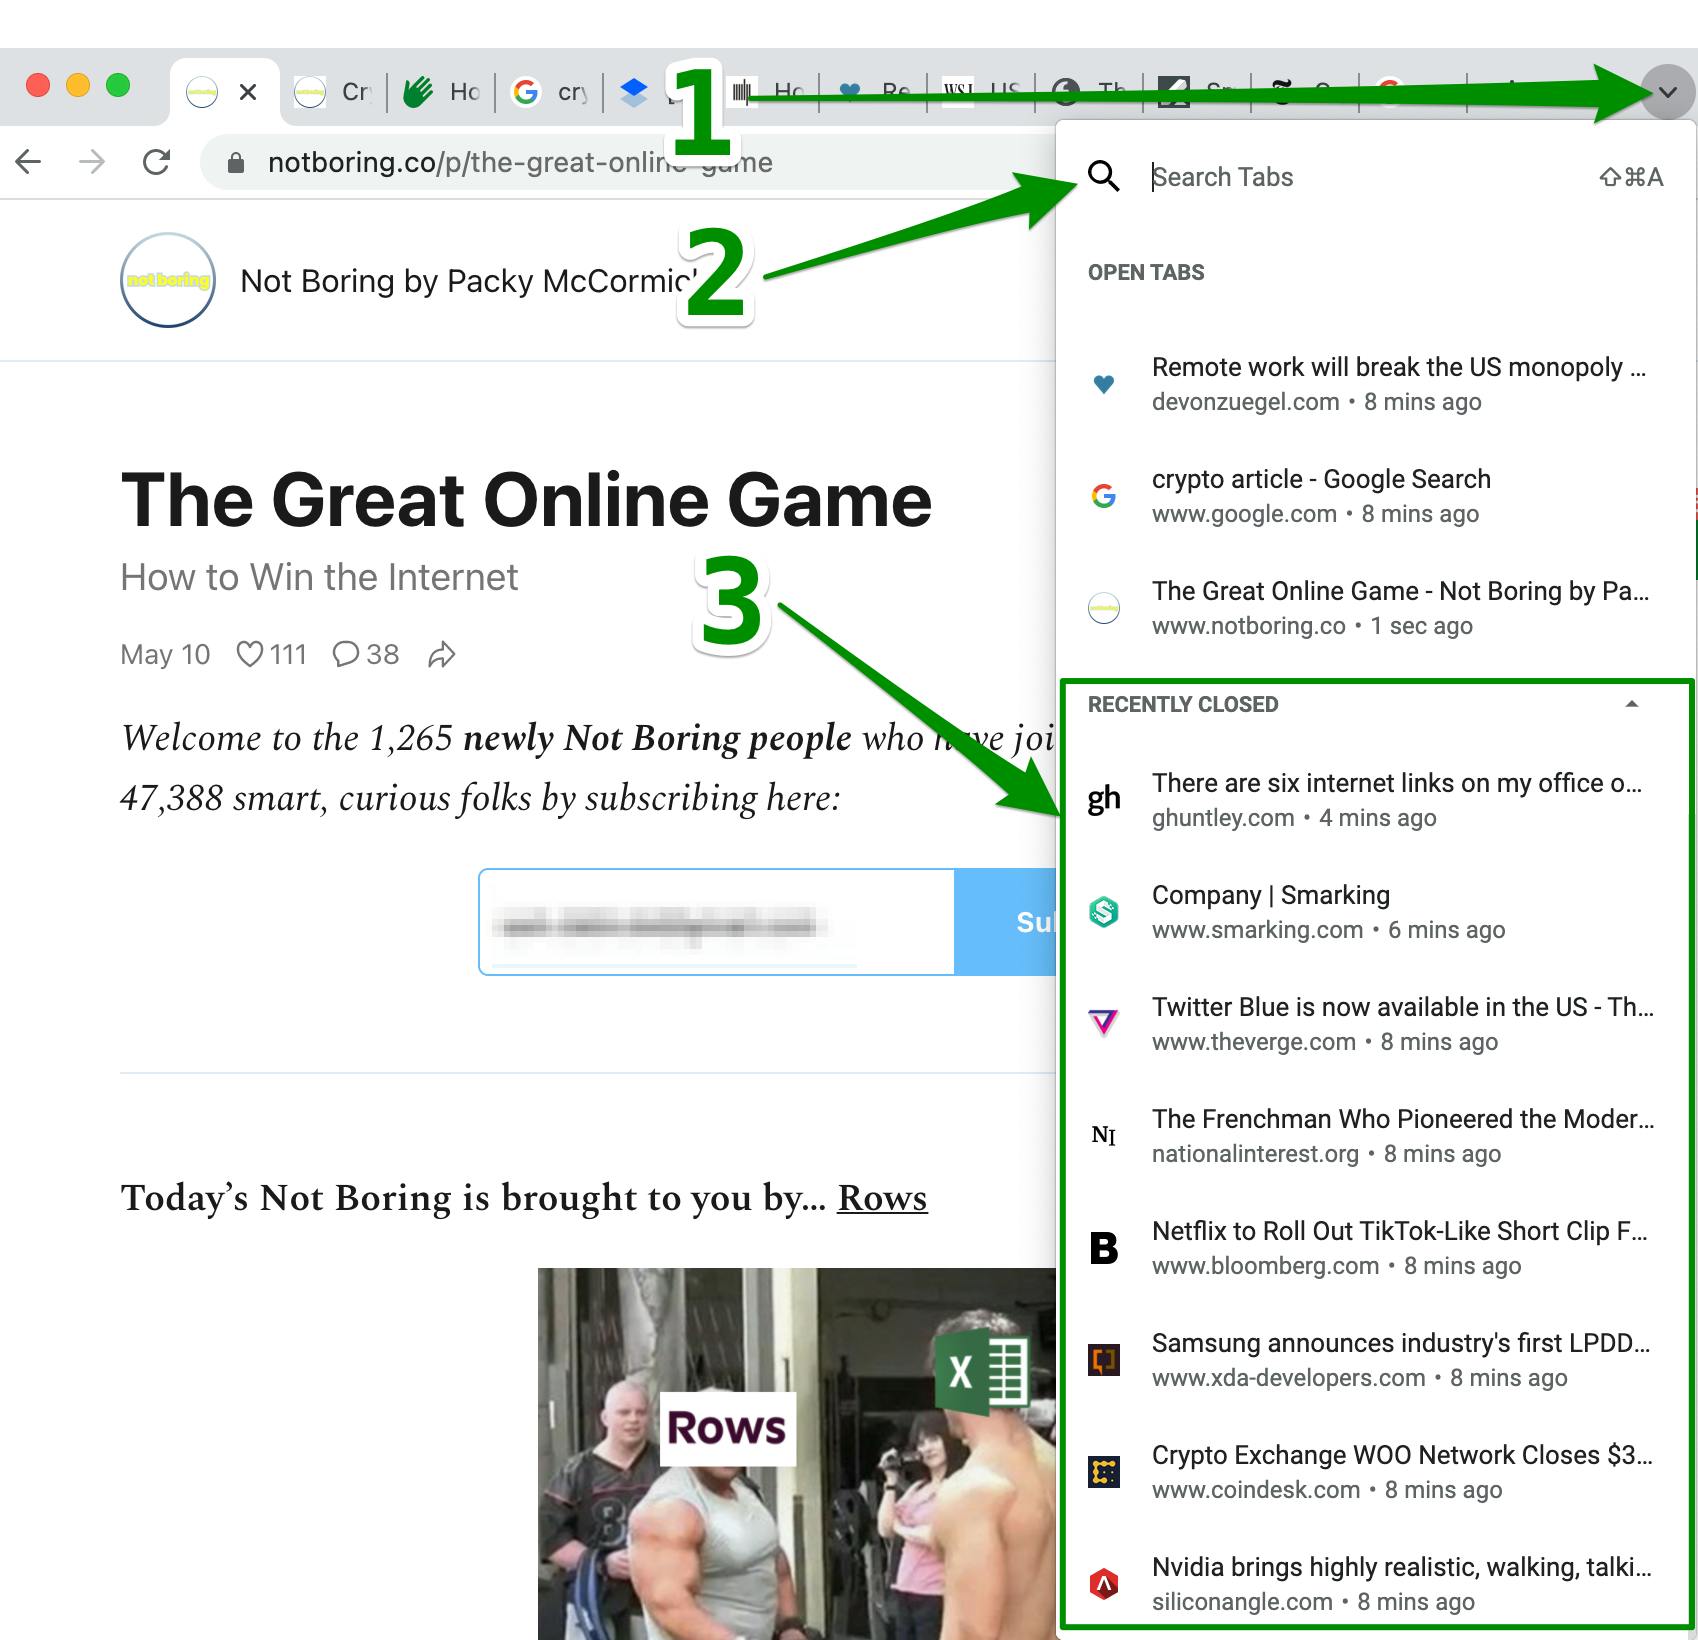 Chrome browser, Search tabs menu, Recently Closed section surrounded by green box